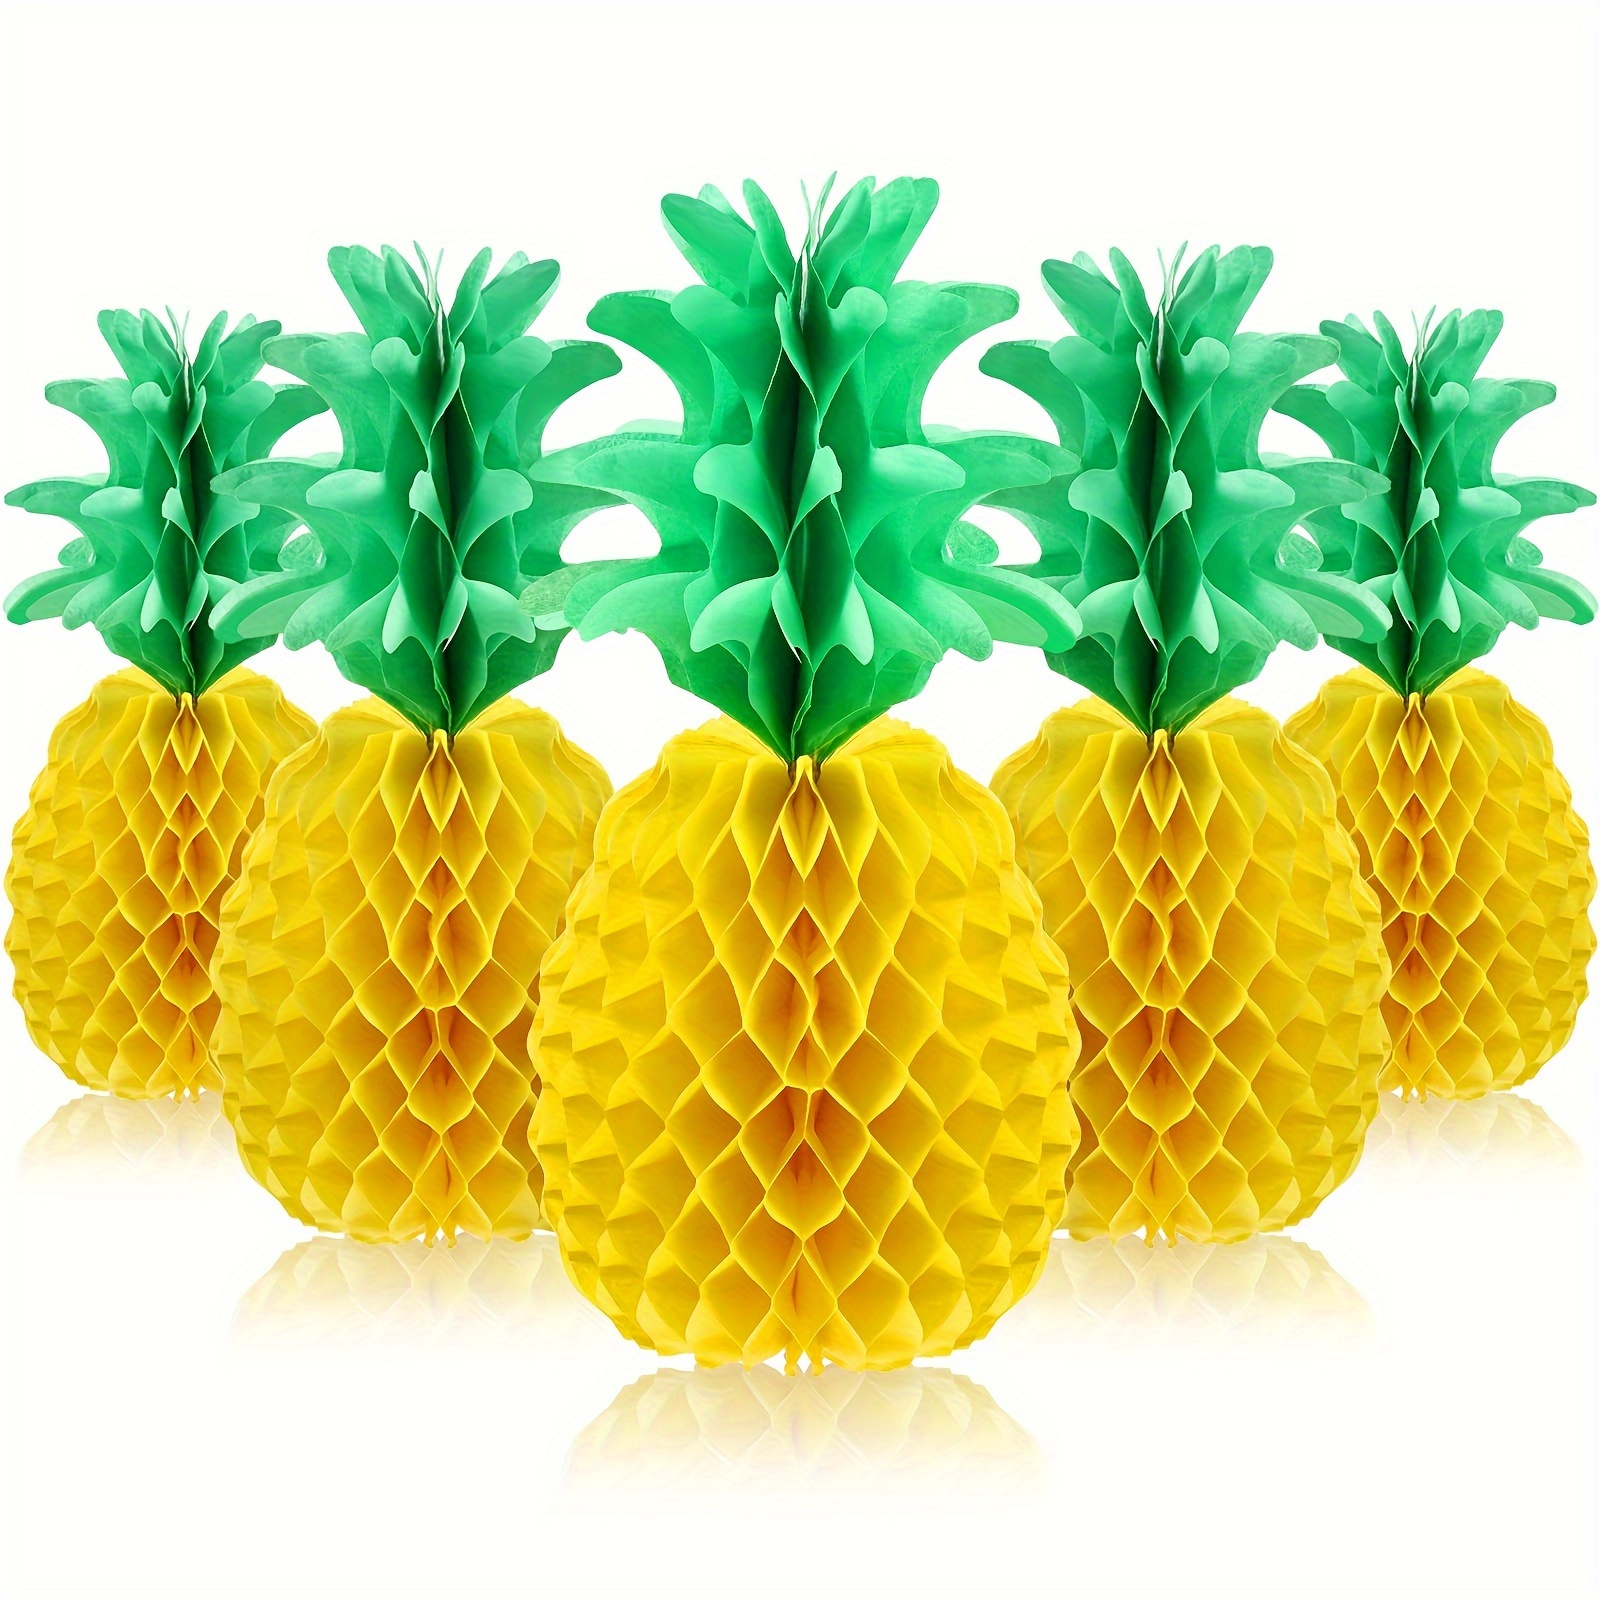 

3pcs, Pineapple Honeycomb Centerpieces Tissue Paper Pineapple Table Hanging Decorations For Tropical Luau Hawaiian Jungle Party